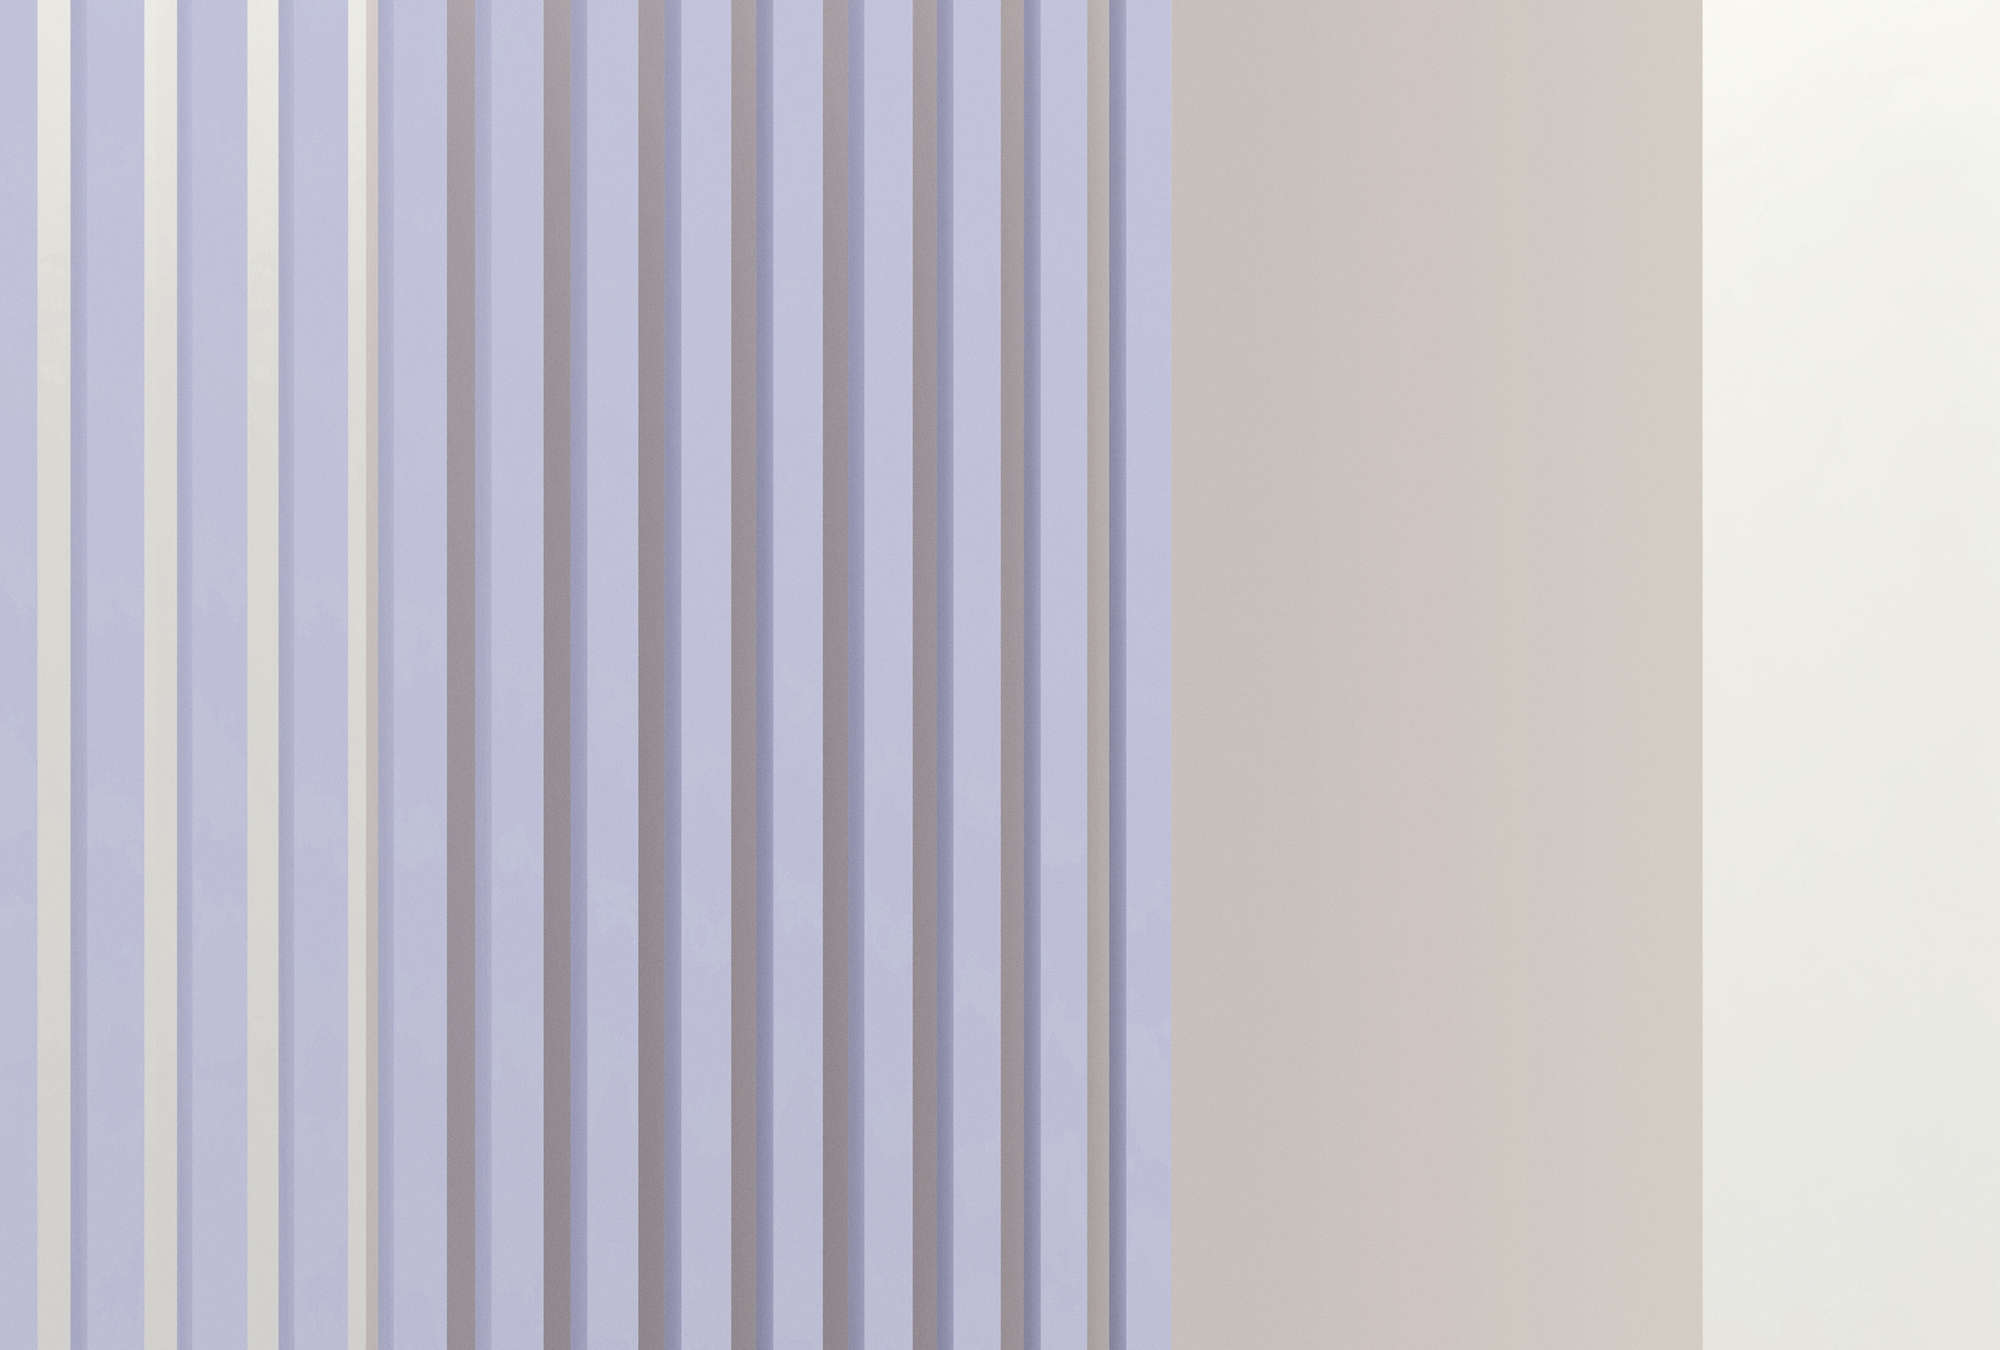             Illusion Room 1 - wall mural 3D stripes design in purple & grey
        